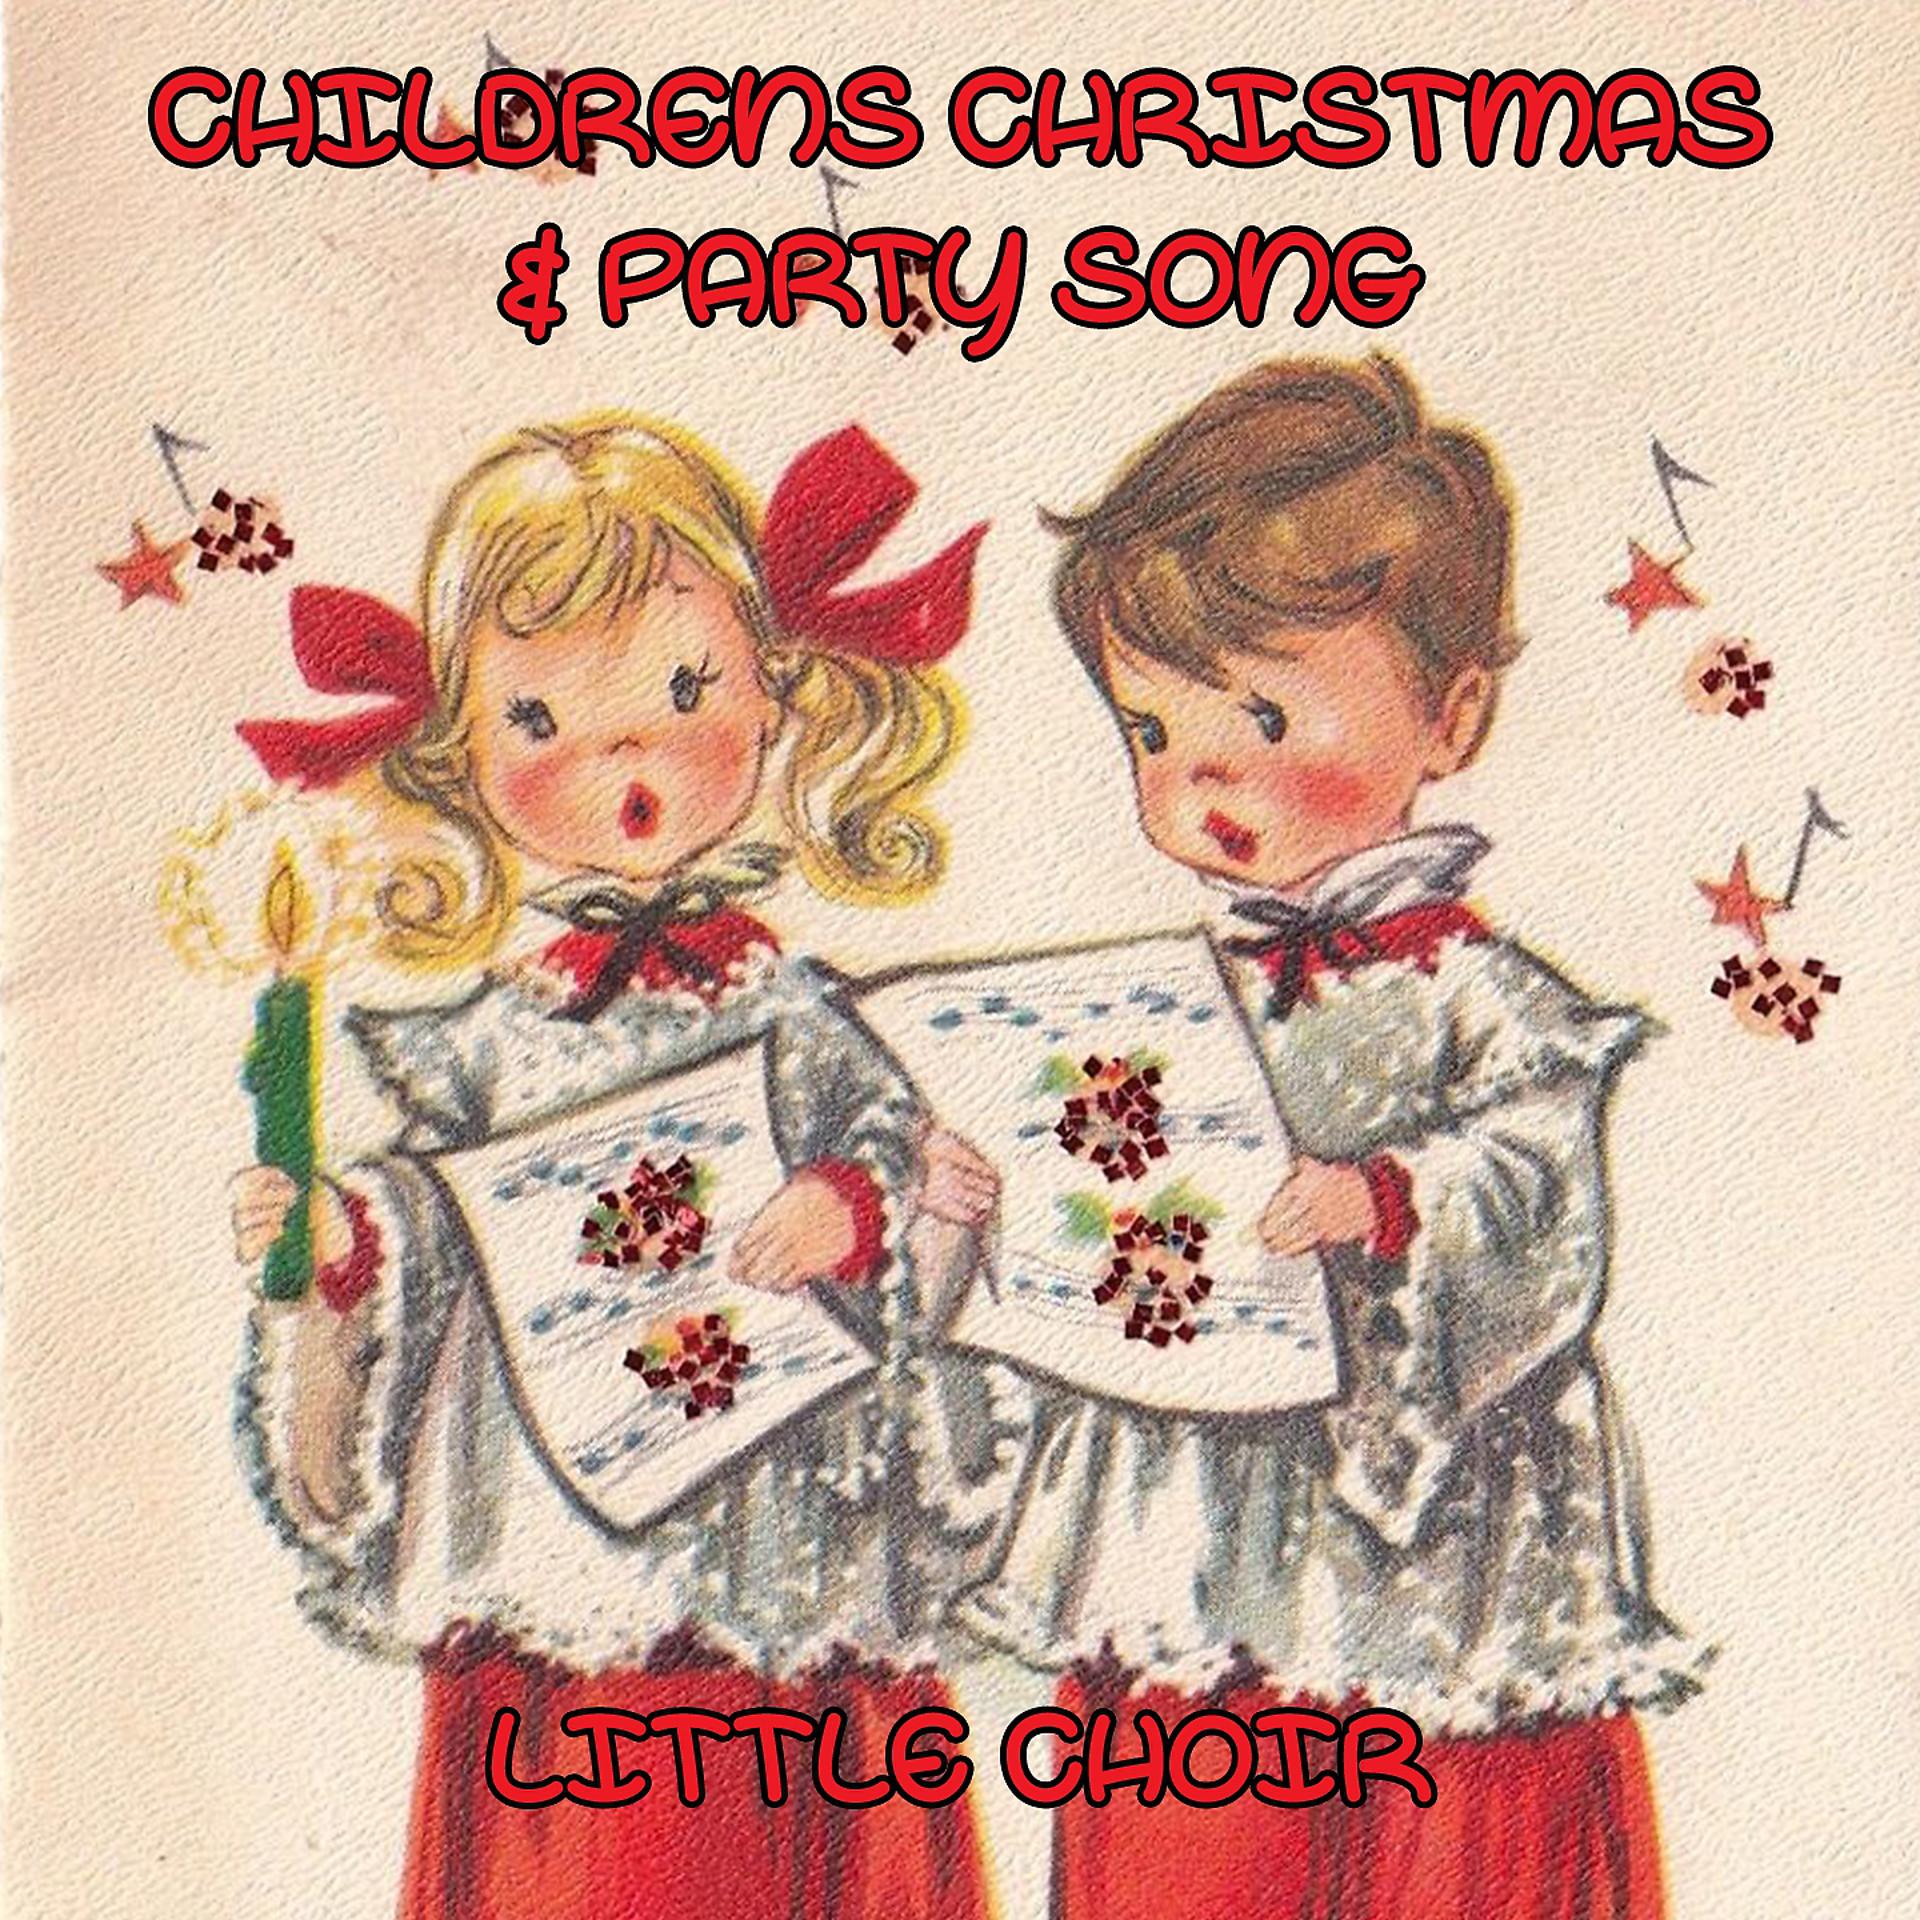 Постер альбома Childrens Christmas & Party Songs Medley: Calypso Carol / It's Christmas Time Again / Music Band / Ring A Ring A Roses / Here We Go Up To Bethlehem / Away In A Manger / Sally Go'Round The Sun / Hokey Cokey / Father Christmas